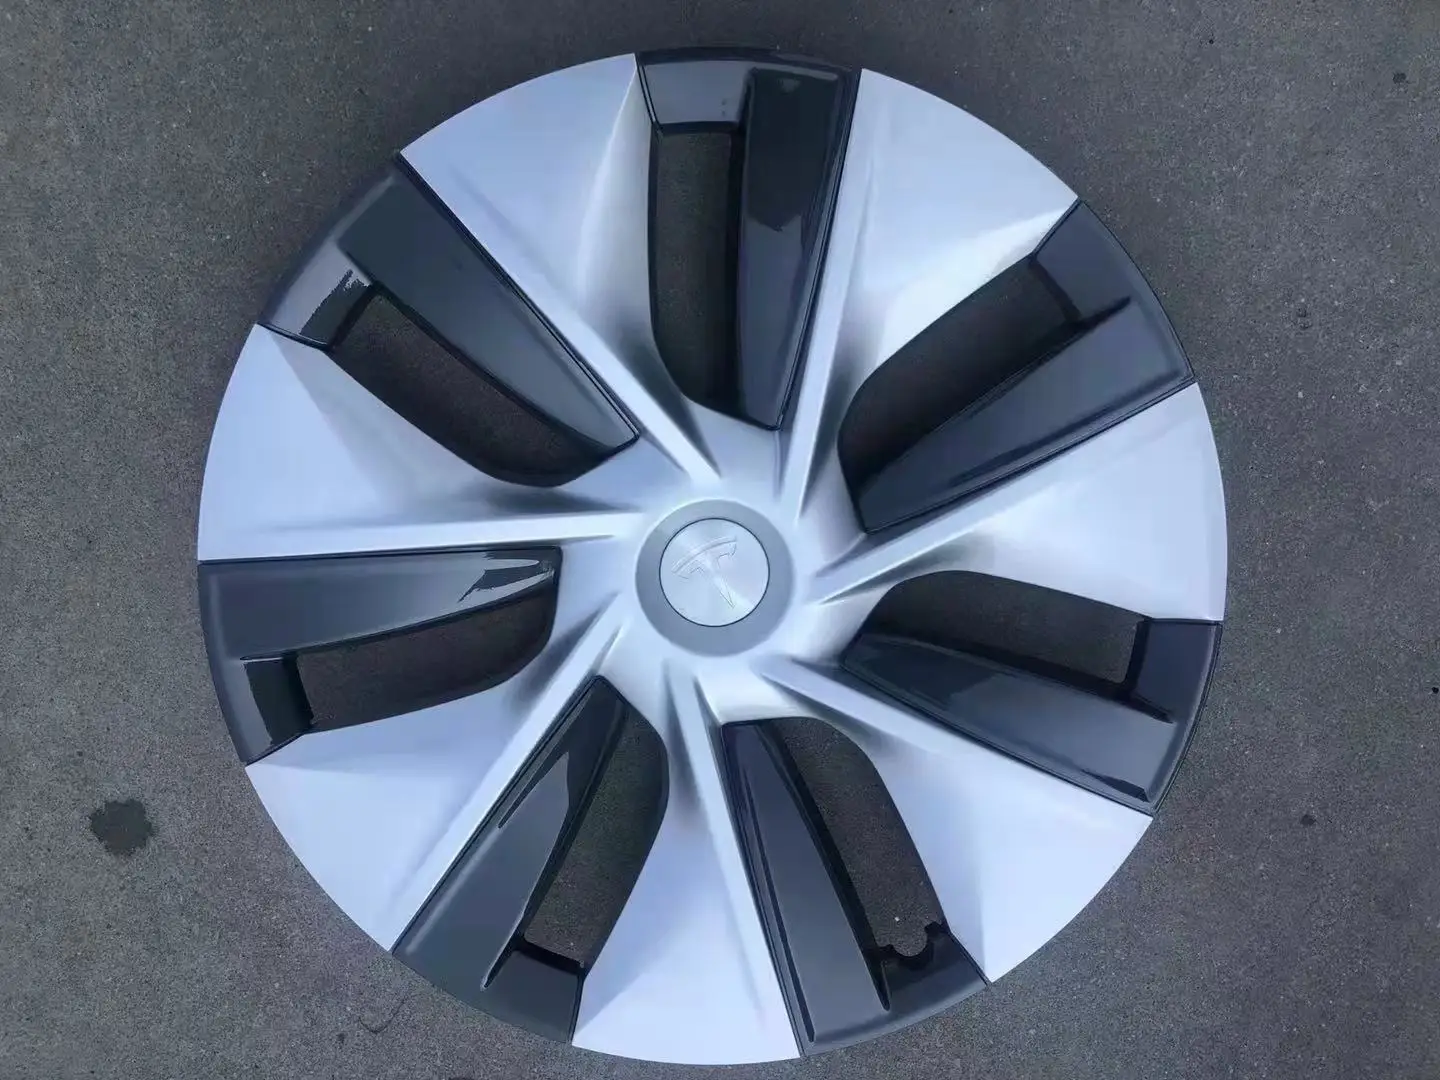 Applicable to 2020 Tesla m3 my hub cover